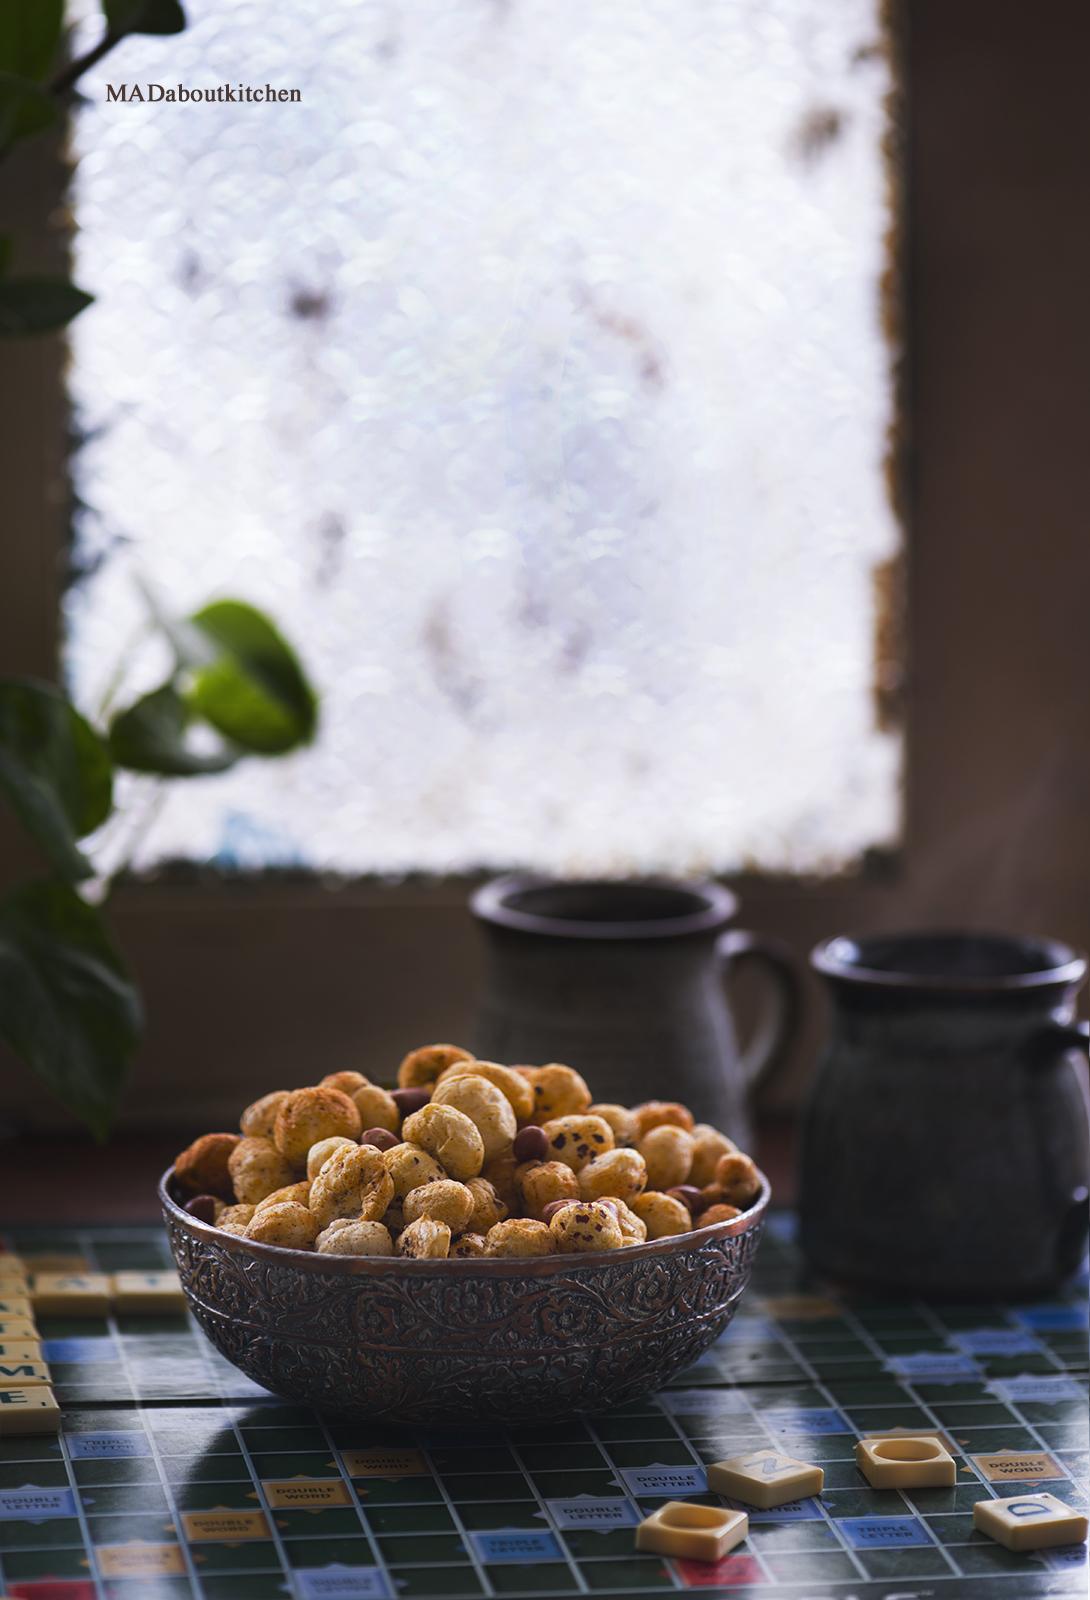 Makhana / Lotus Seeds snack is high in protein, carbohydrates, fibre, low in calories makes it a healthy and perfect teatime snack. 